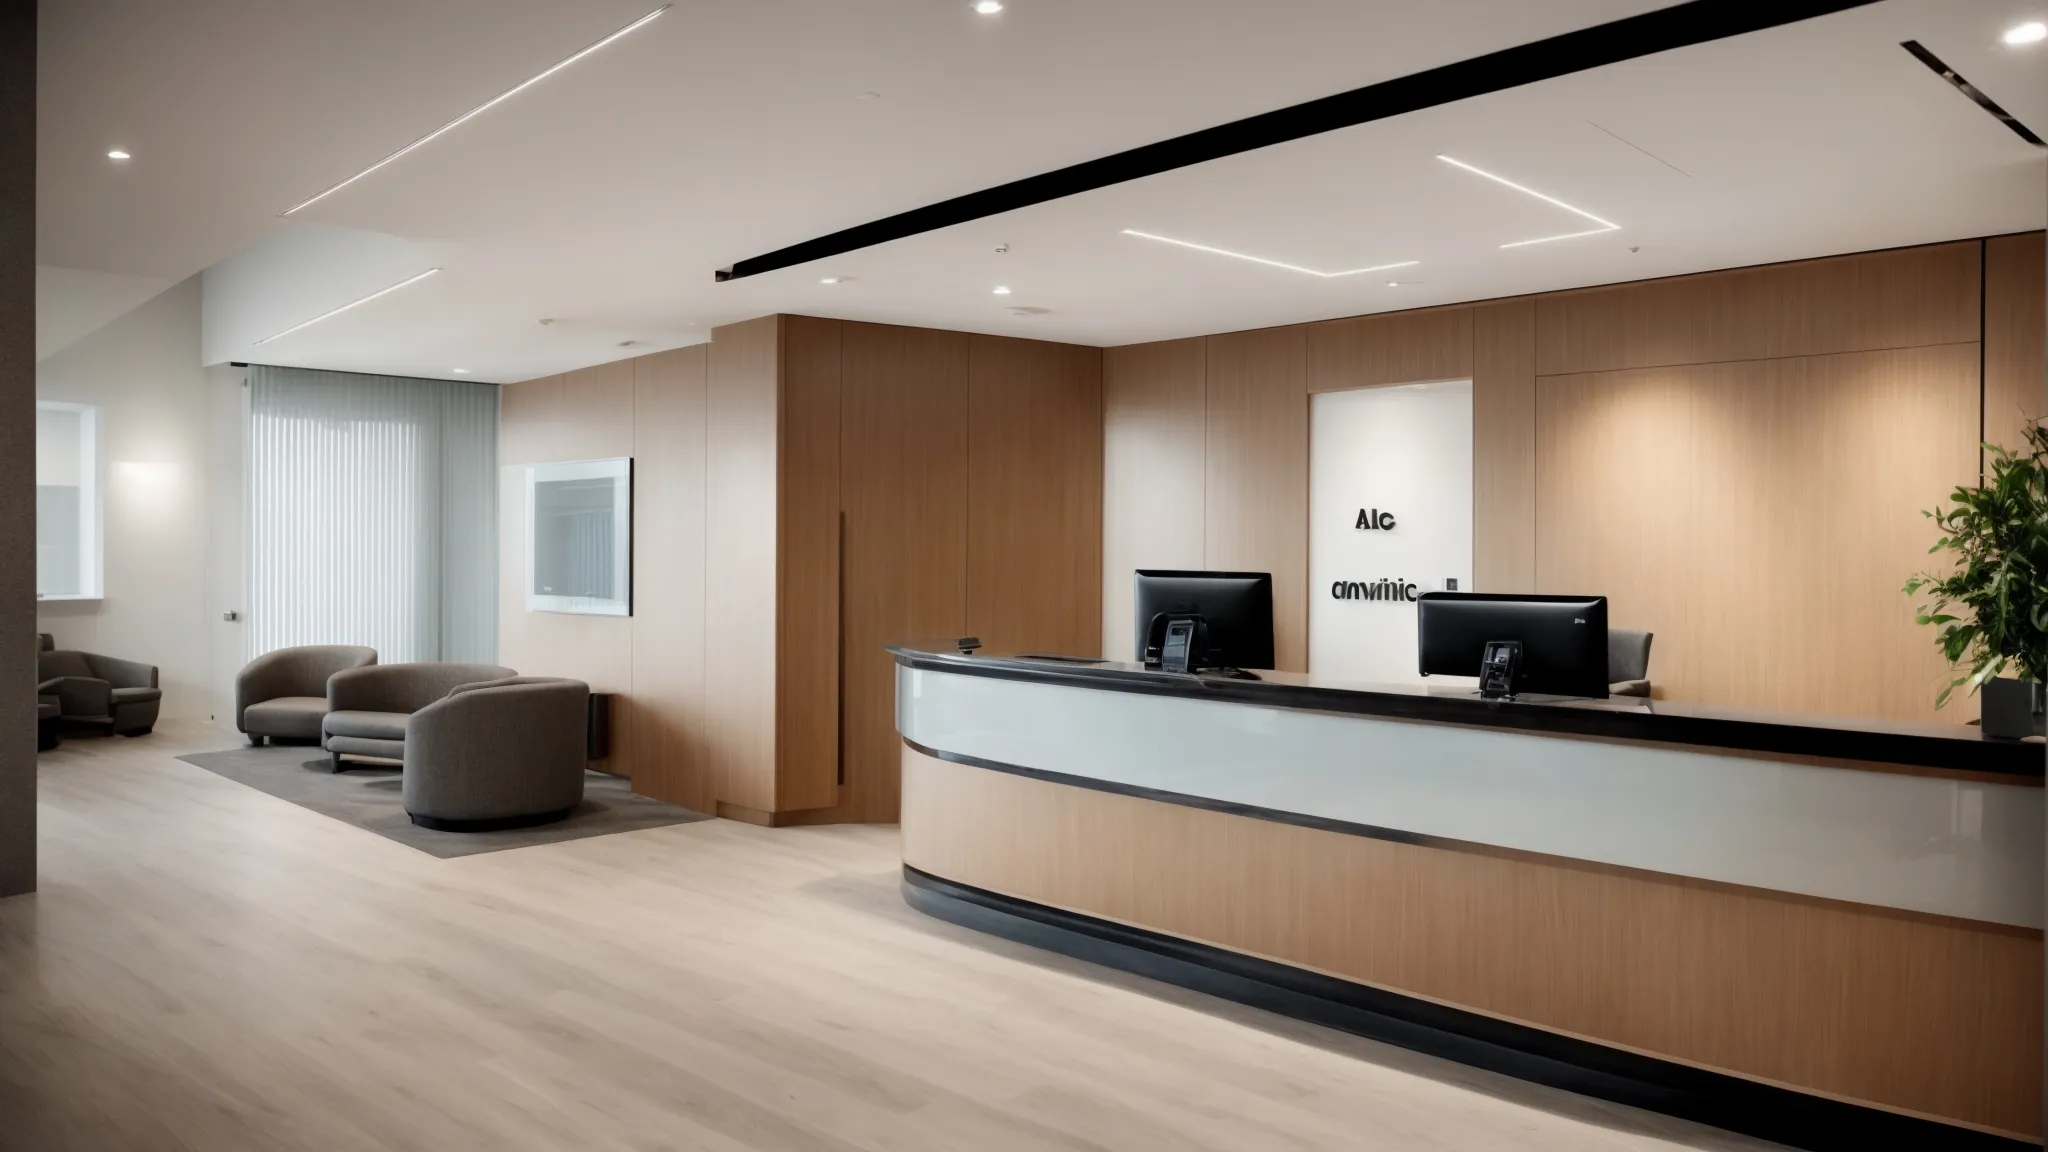 an image of a sleek, modern law office reception area with a clean design and advanced technology visible.